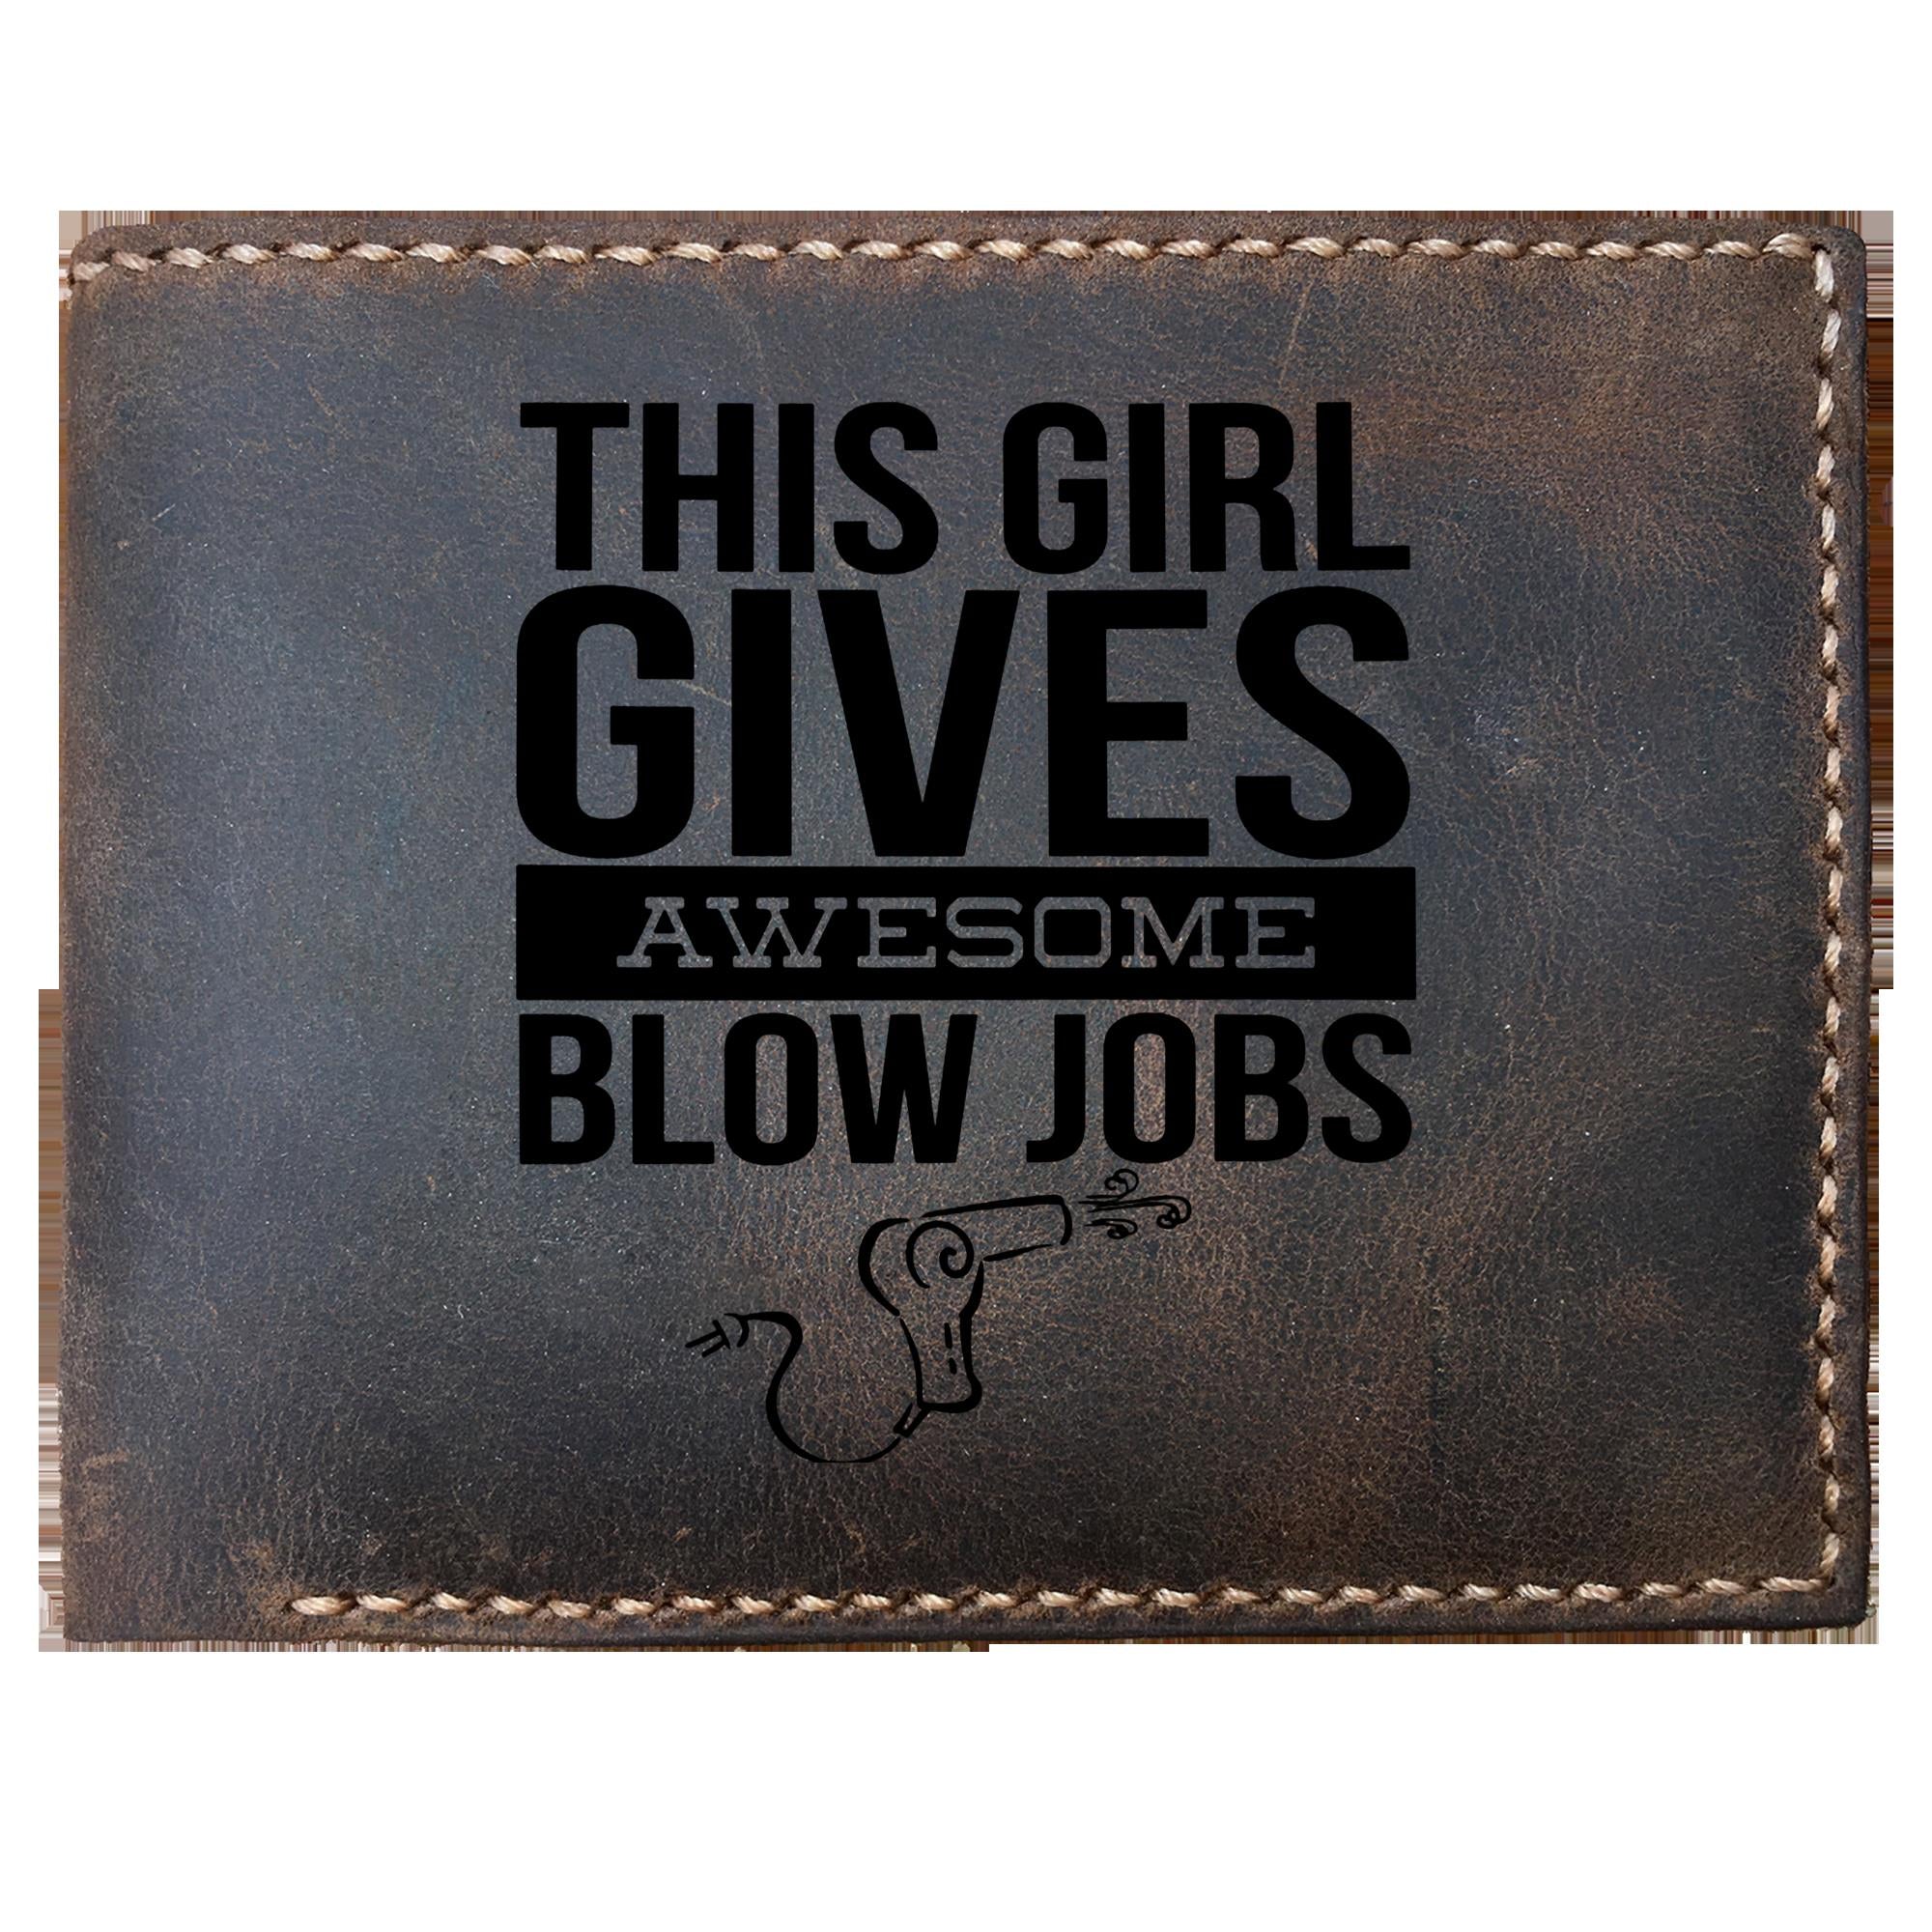 Skitongifts Funny Custom Laser Engraved Bifold Leather Wallet For Men, This Girl Gives Awesome Blow Jobs